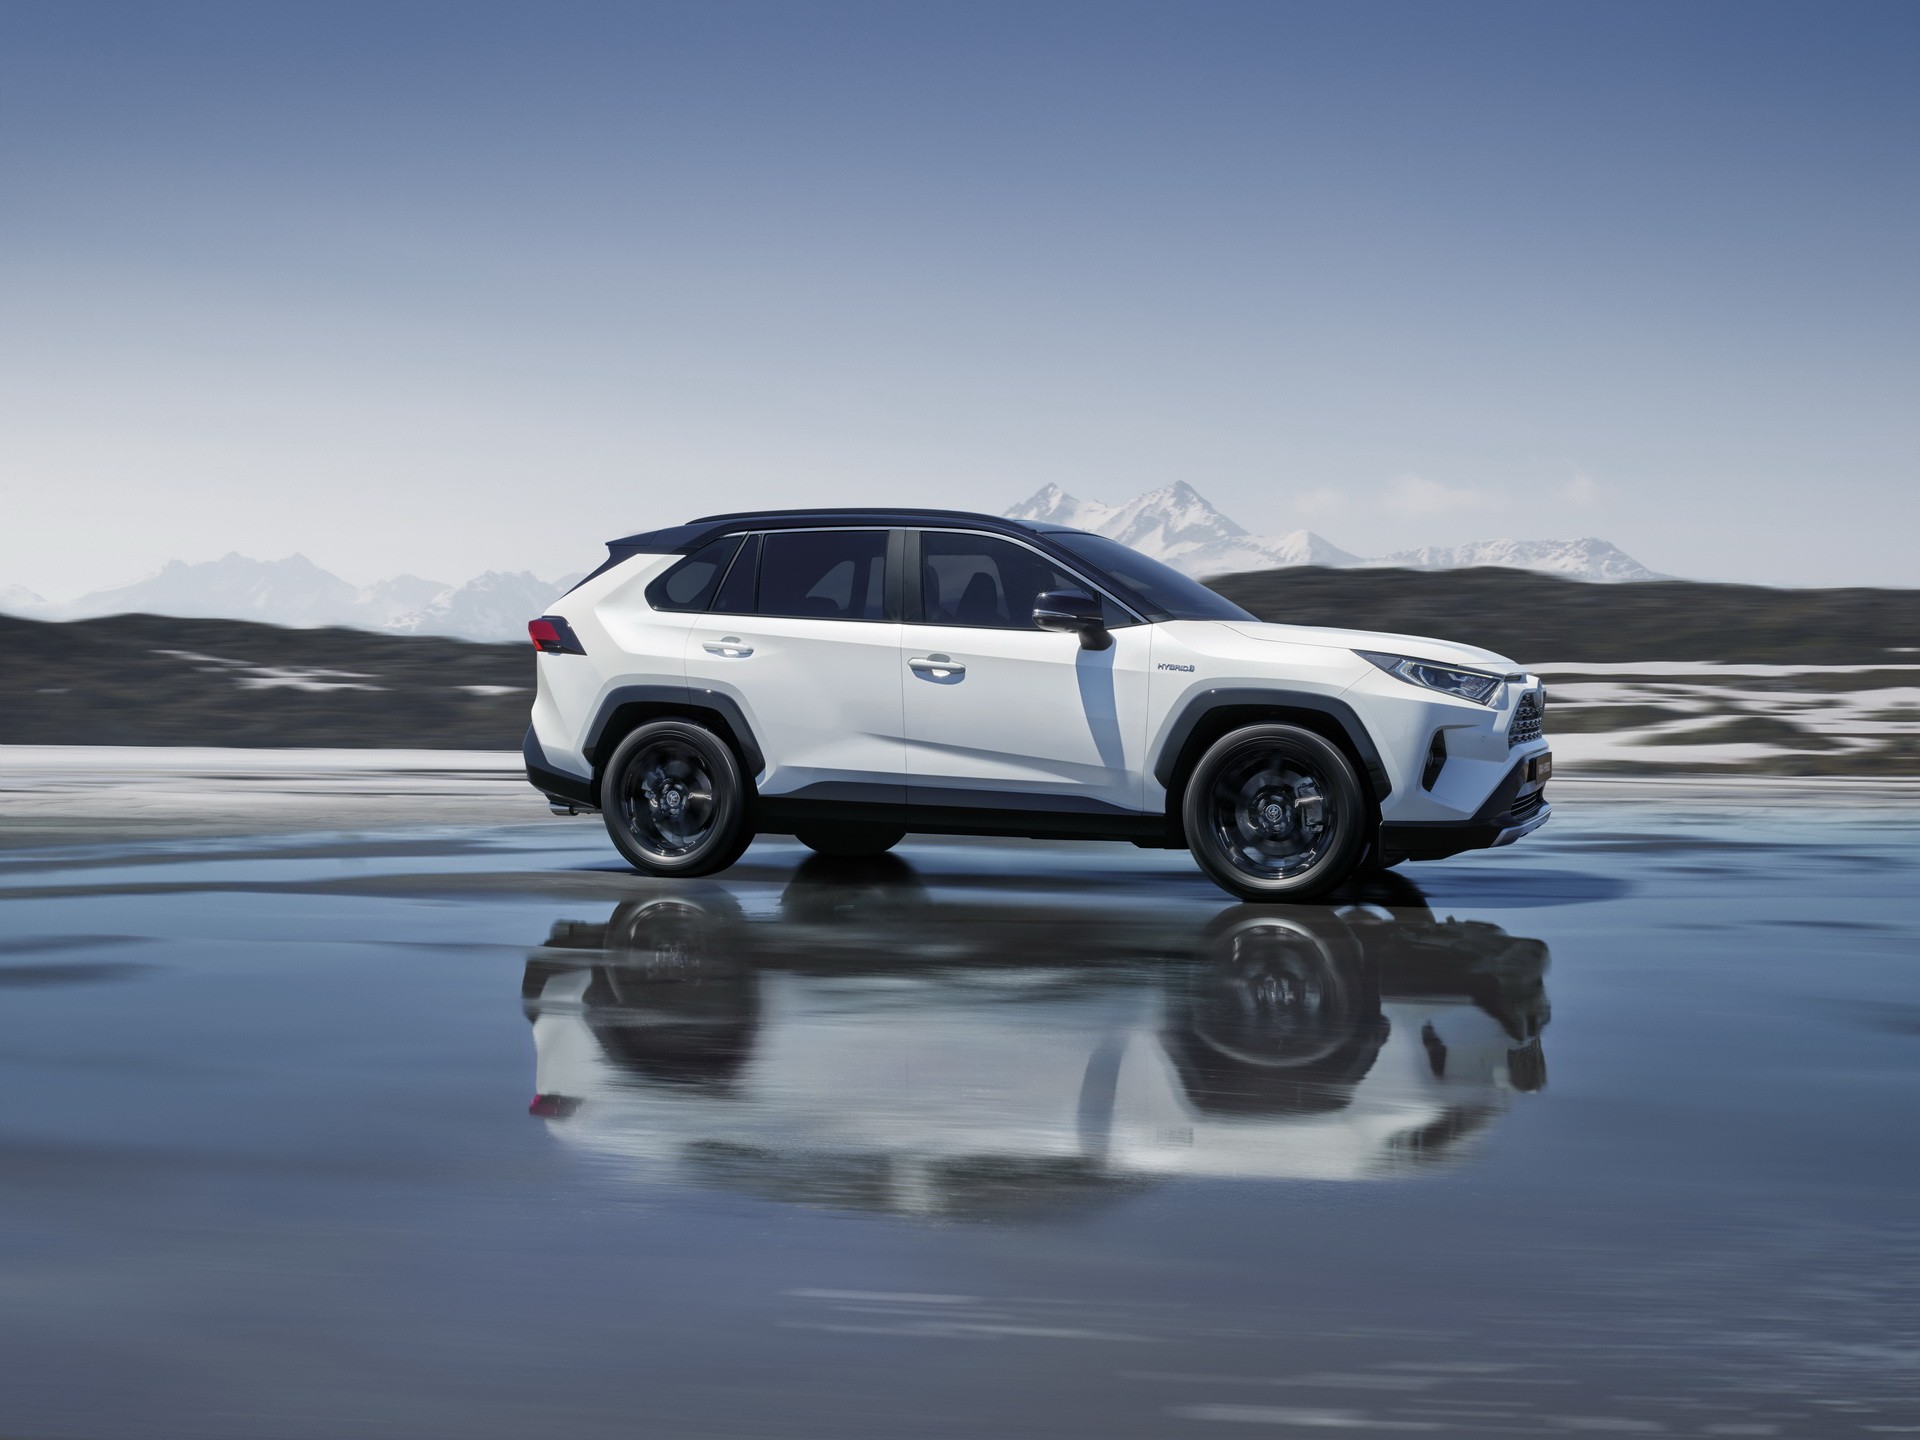 VSC Software Update Helps the Toyota RAV4 Pass the Moose